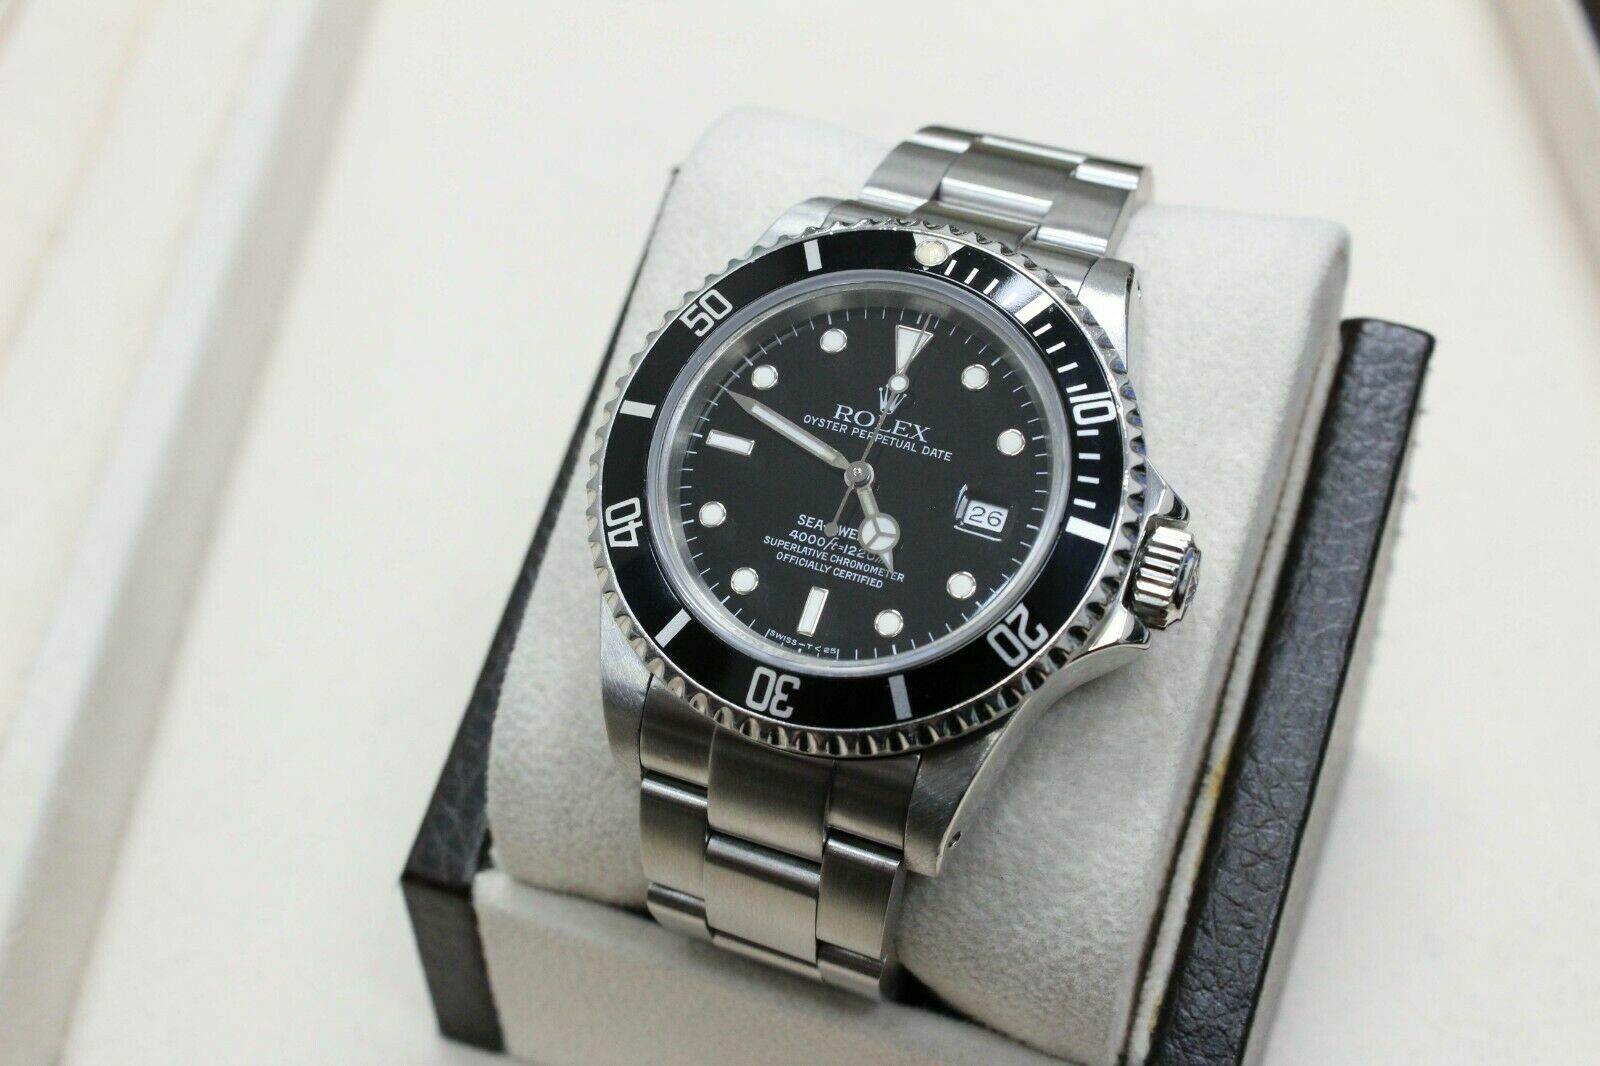 Style Number: 16660

Serial: 8350***

Model: Sea Dweller

Case Material: Stainless Steel

Band: Stainless Steel

Bezel: Black

Dial: Black

Face: Sapphire Crystal

Case Size: 40mm

Includes:

-Elegant Watch Box

-Certified Appraisal

-1 Year